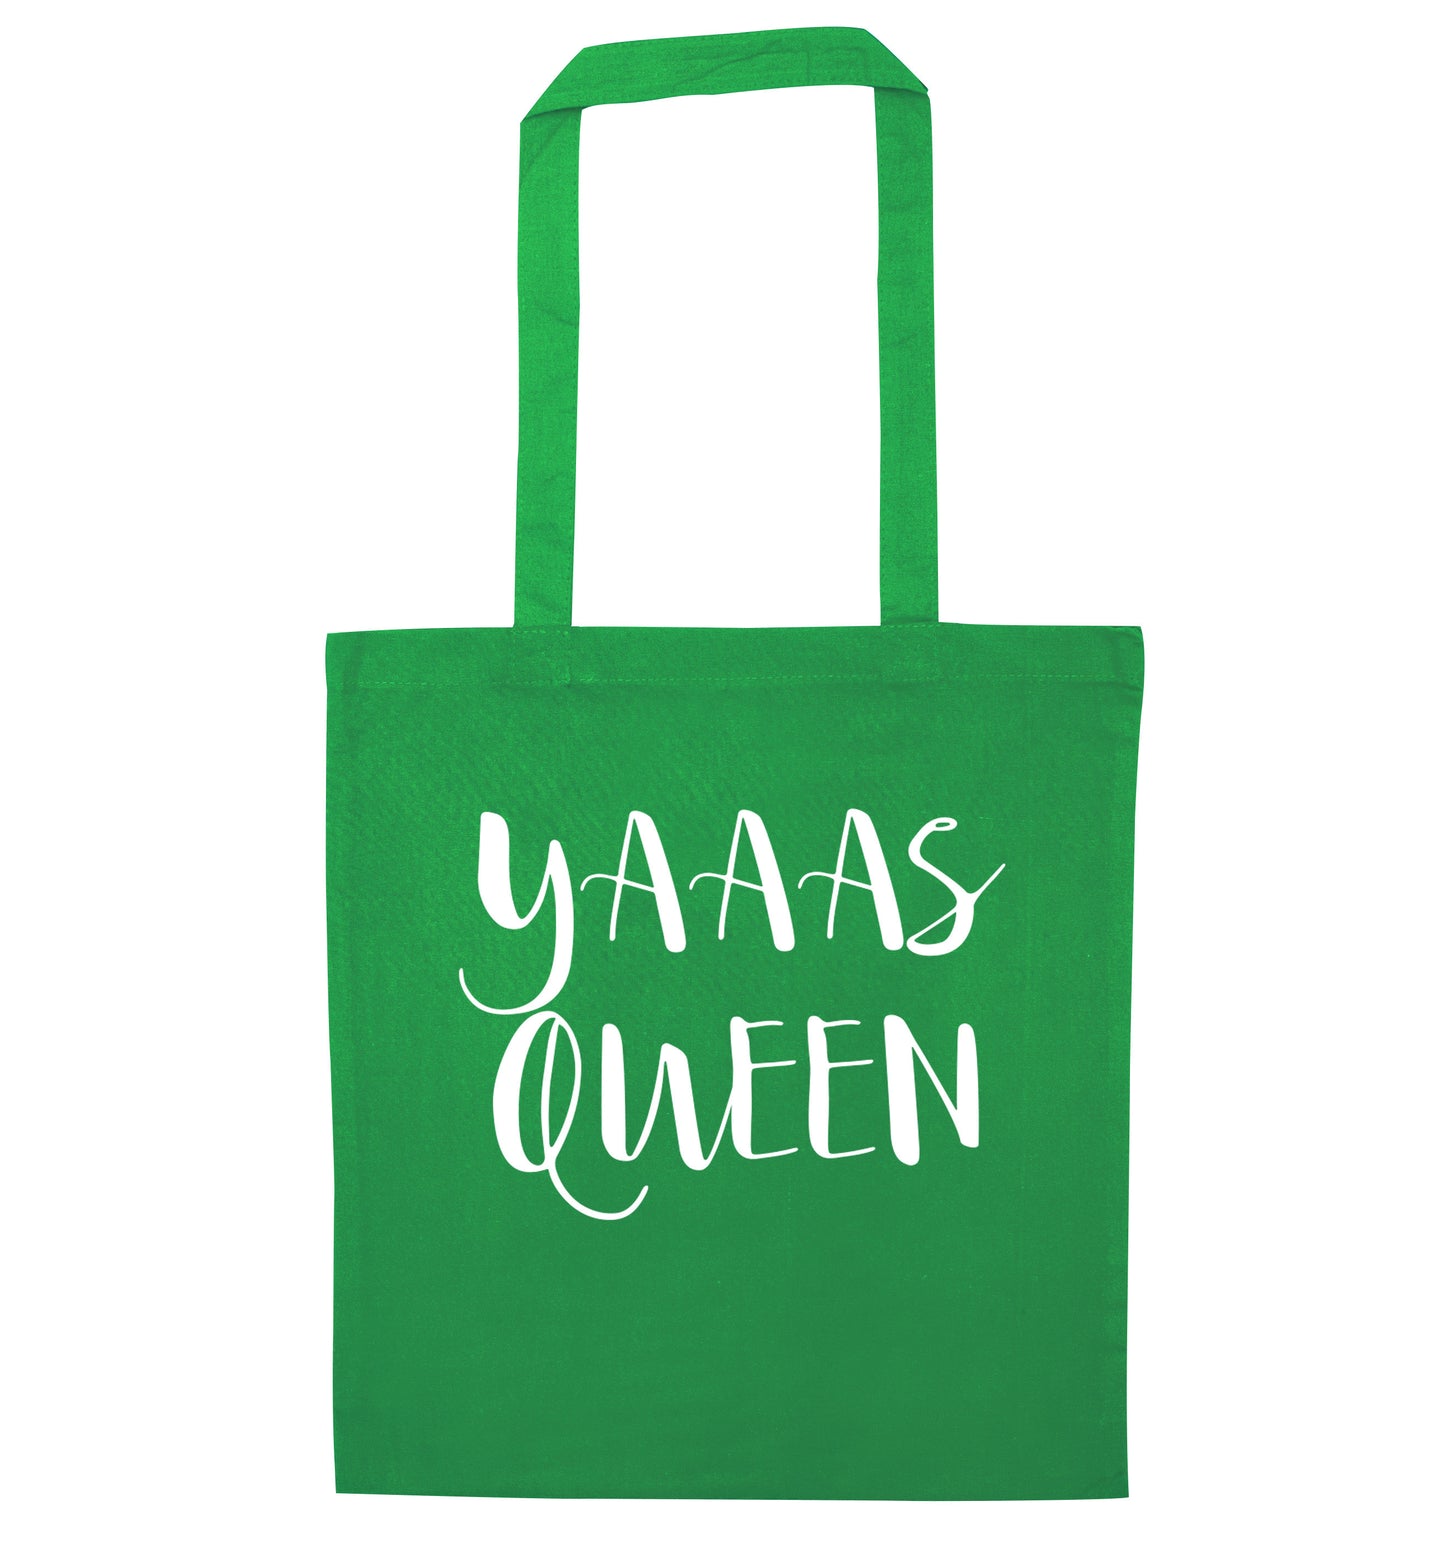 Yas Queen green tote bag